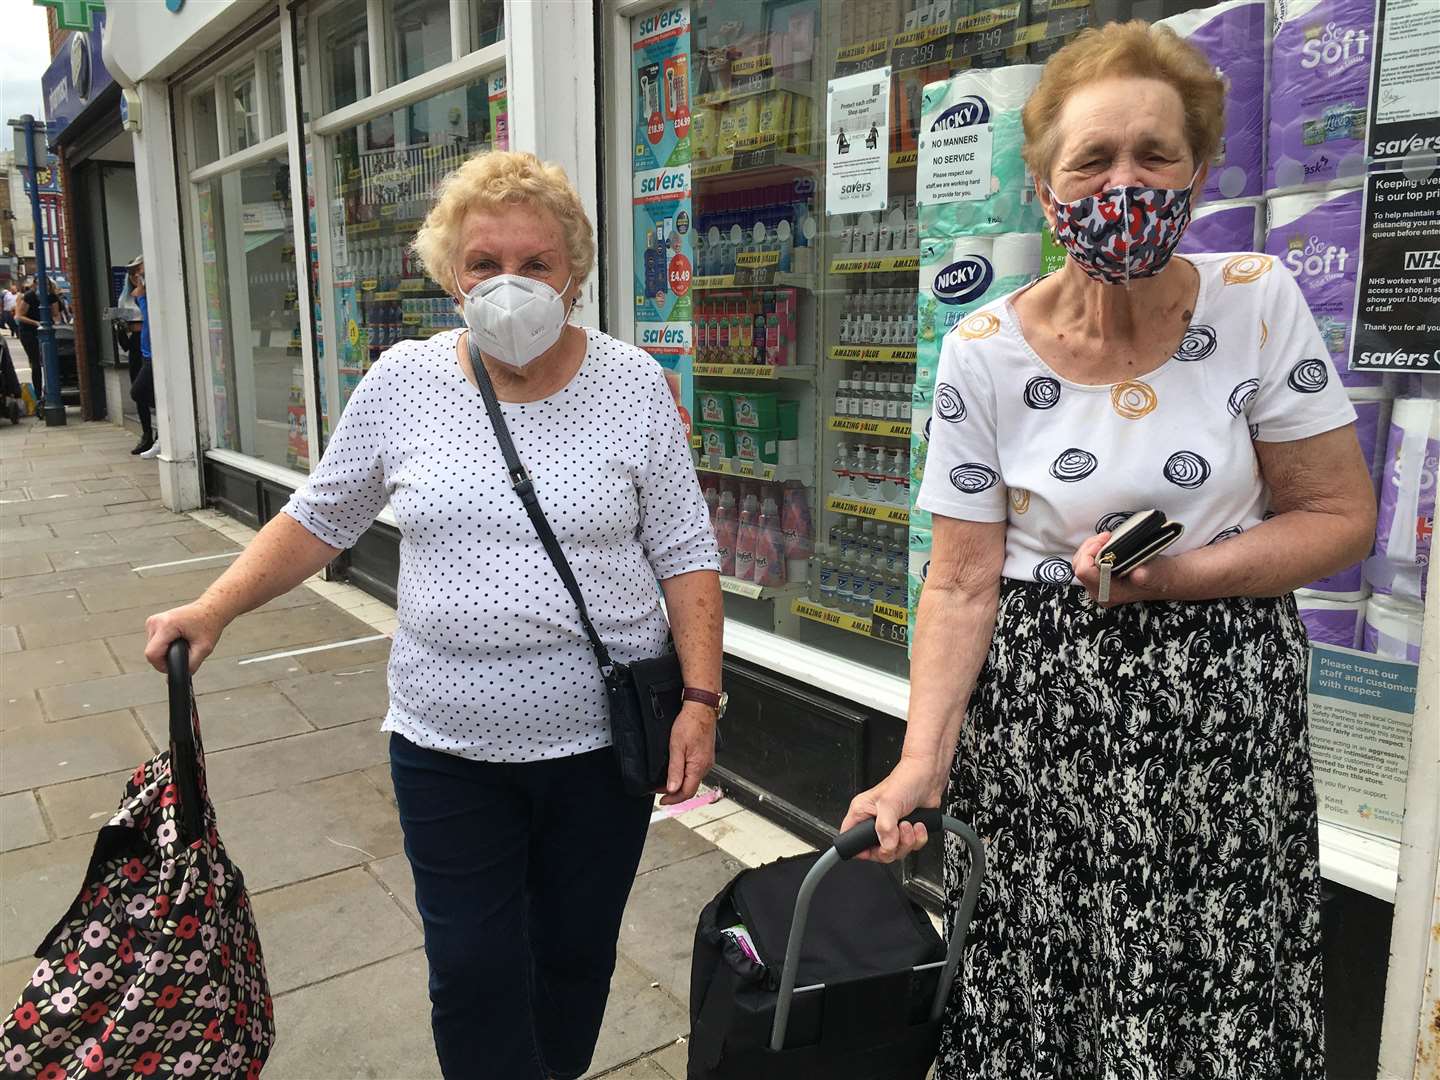 Face masks, as worn by these shoppers on the Isle of Sheppey, became a common sight on Kent's high streets and shopping centres.